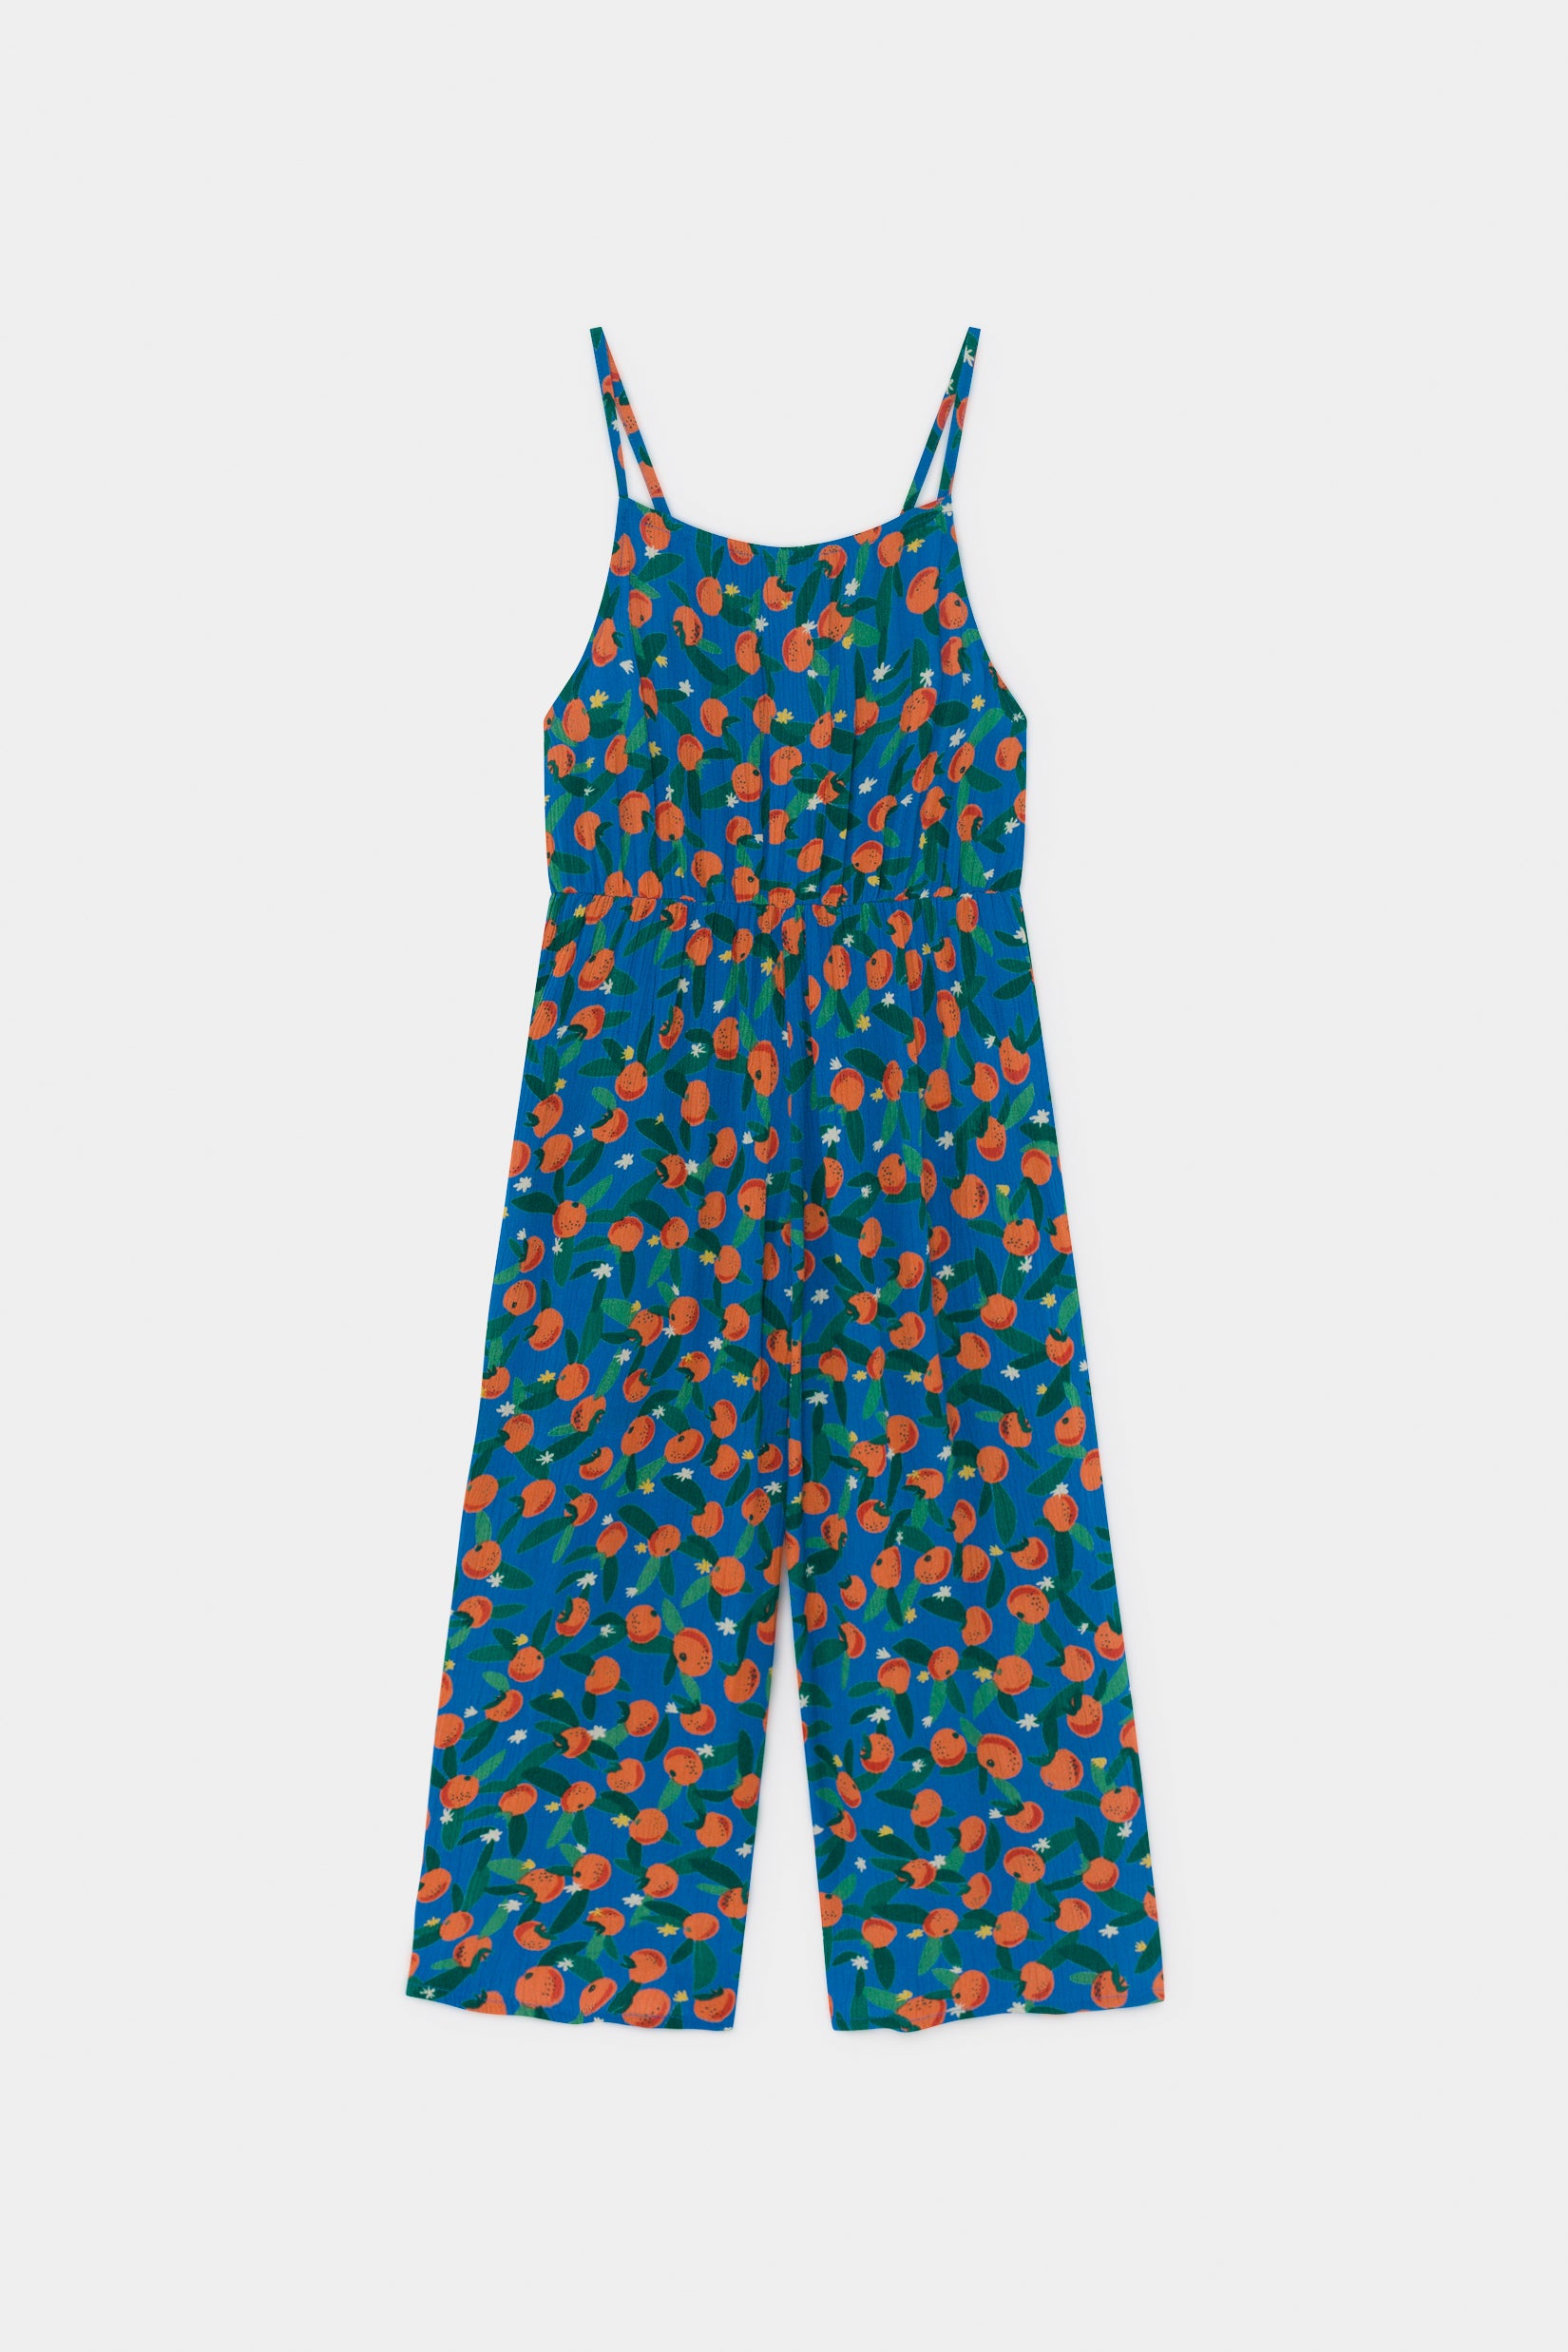 Bobo Choses All Over Oranges Woven Overall